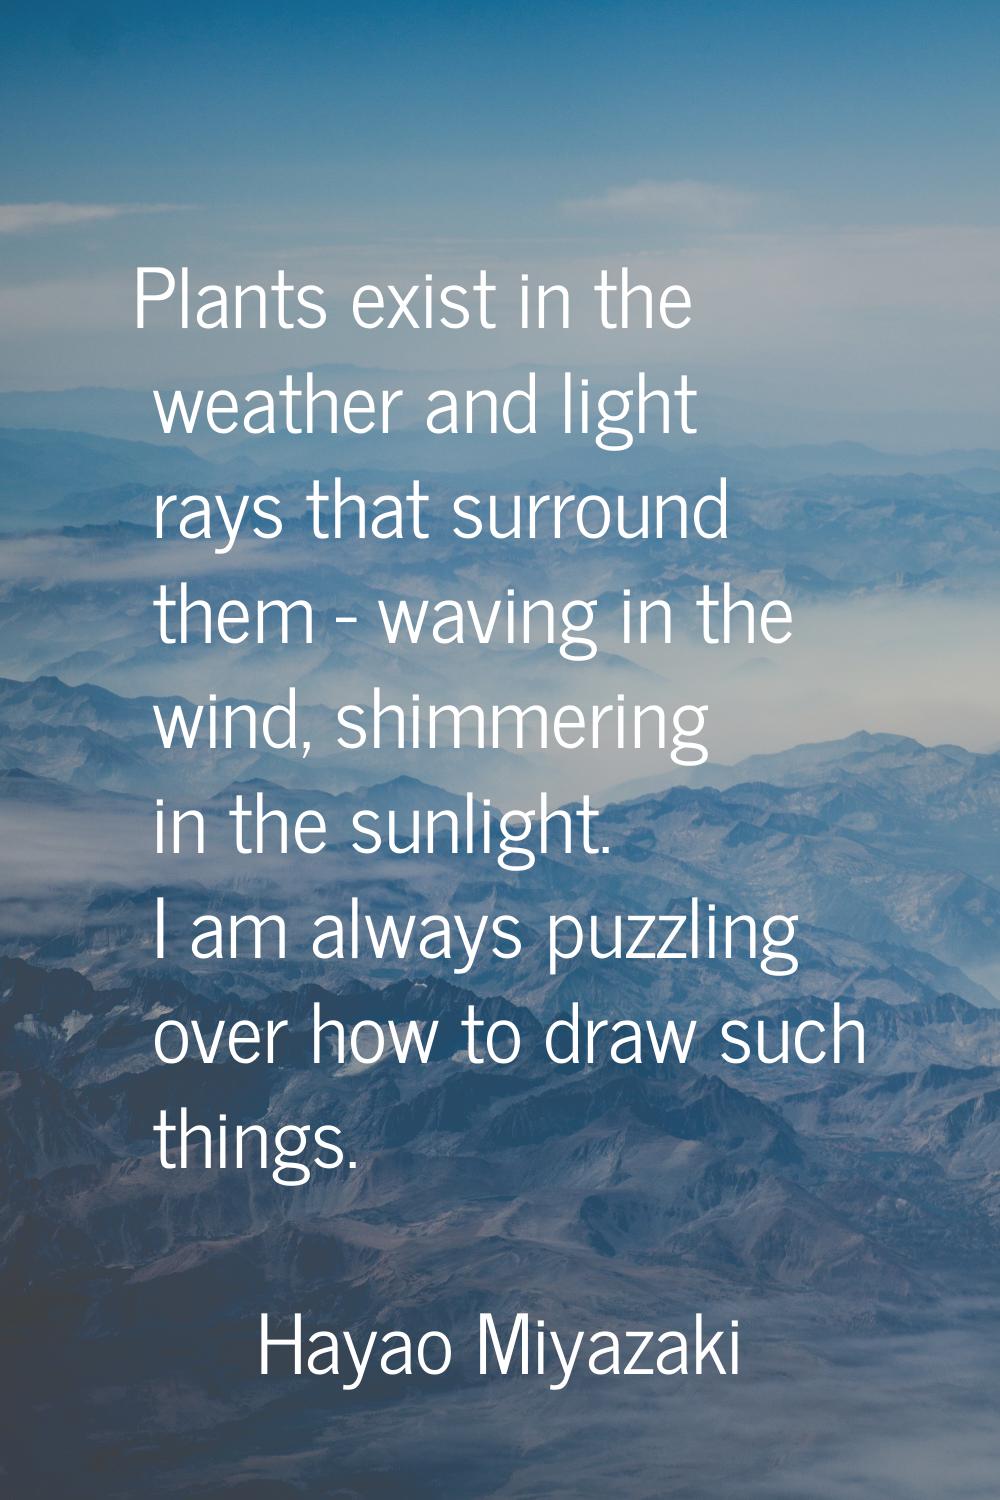 Plants exist in the weather and light rays that surround them - waving in the wind, shimmering in t